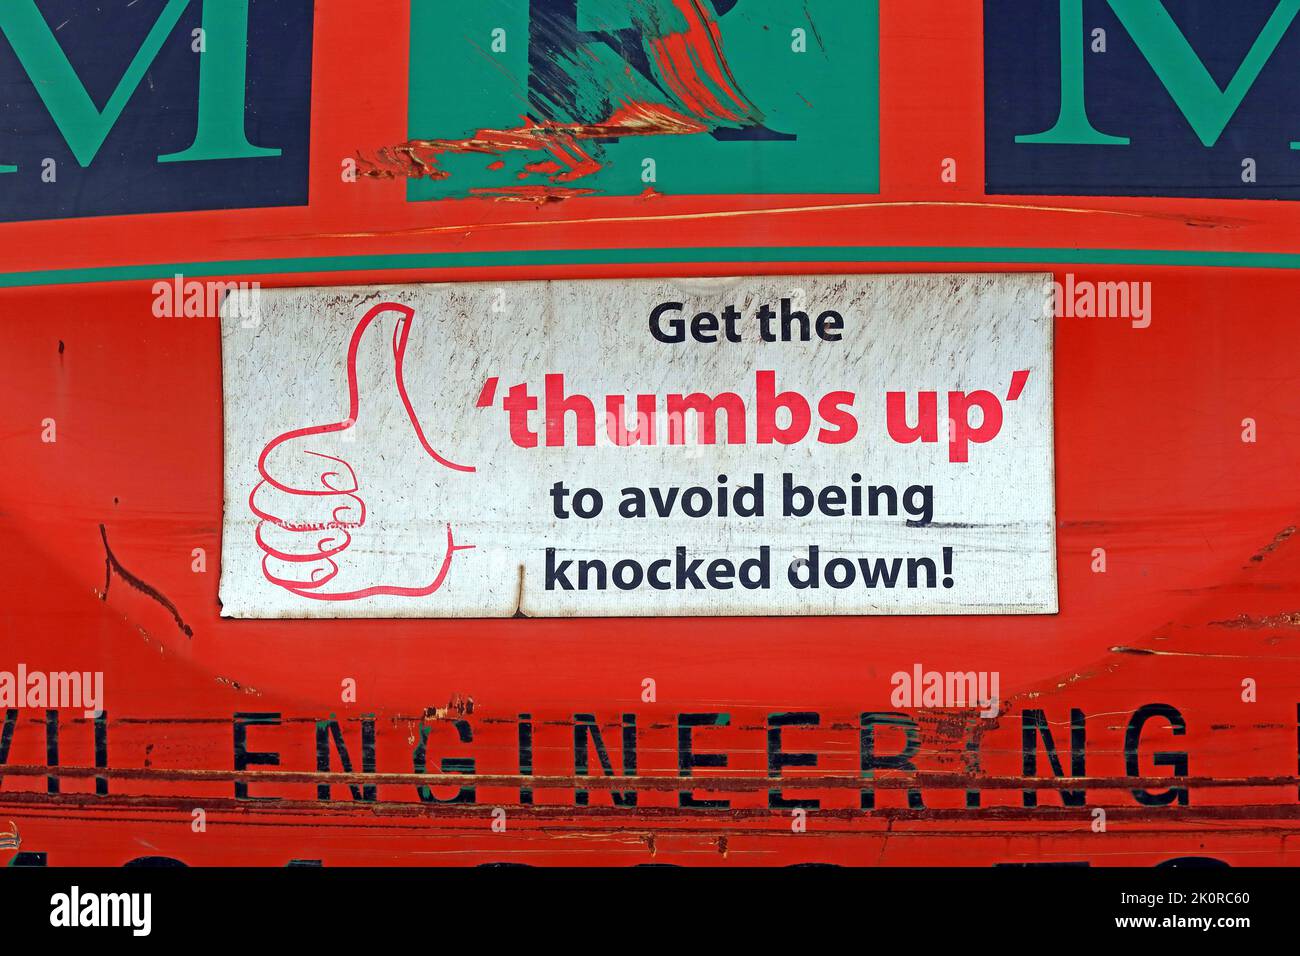 Warning sign on construction vehicle, Get The thumbs up, to avoid being knocked down - Health and Safety notice Stock Photo